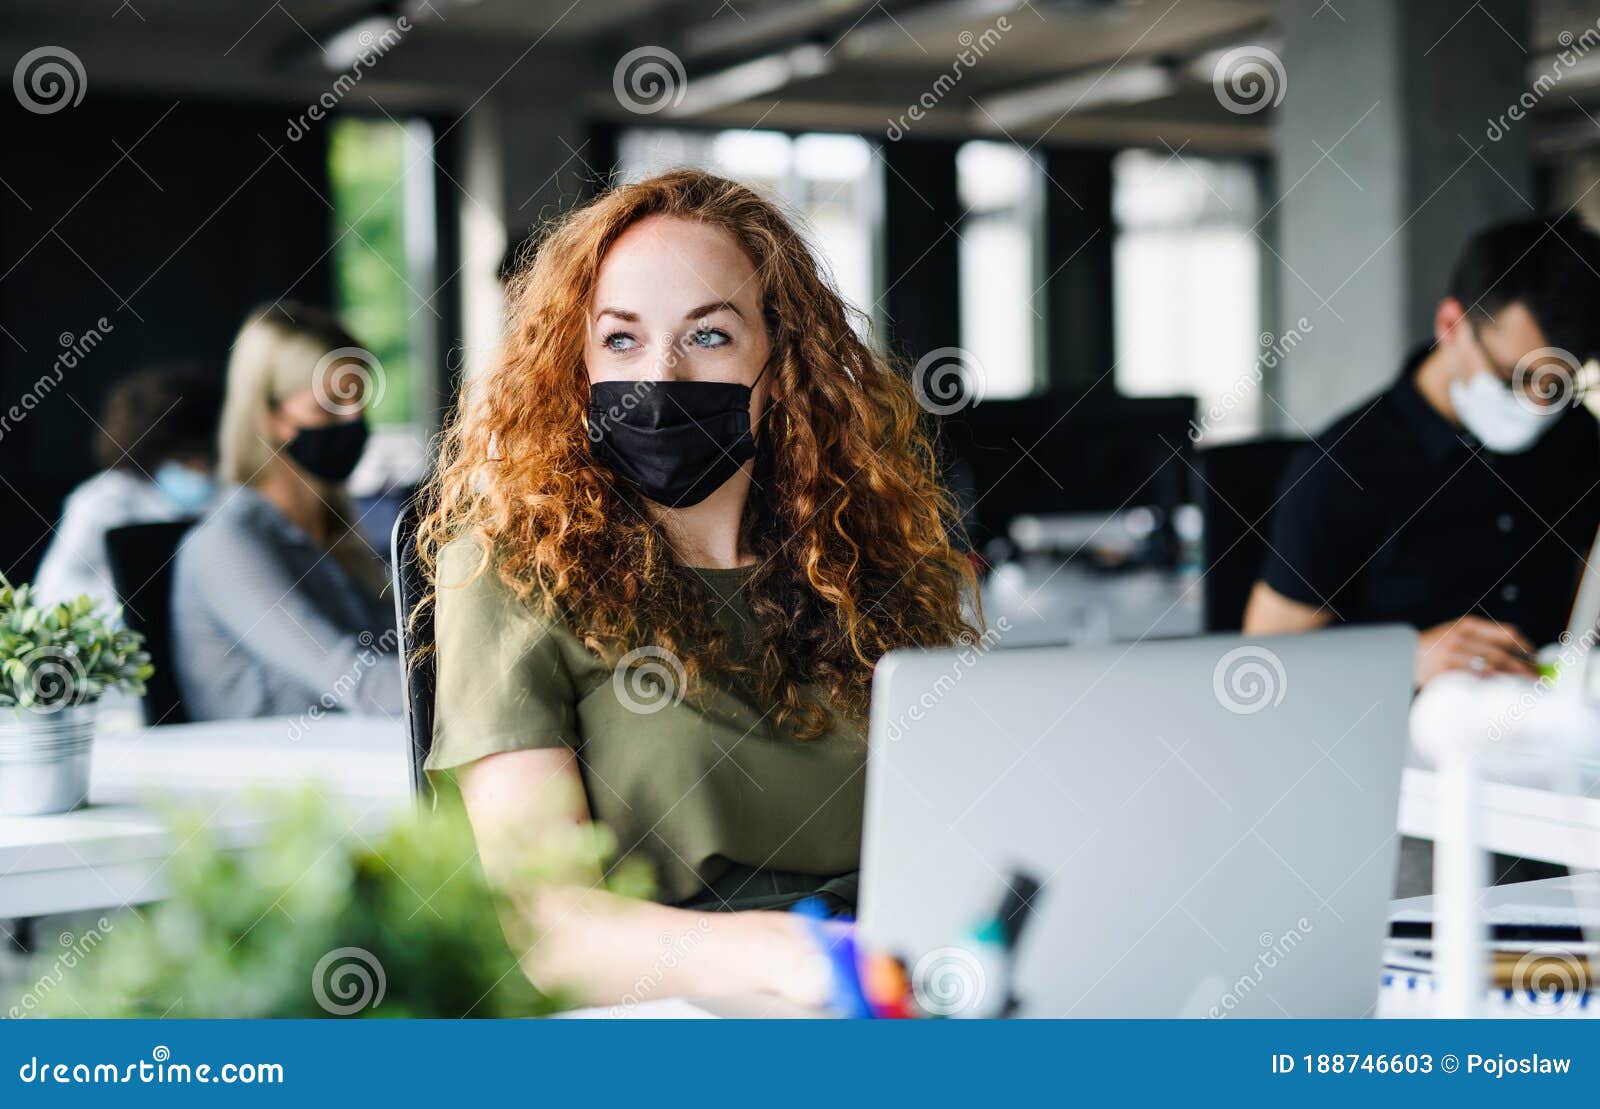 young woman with face mask back at work in office after lockdown.